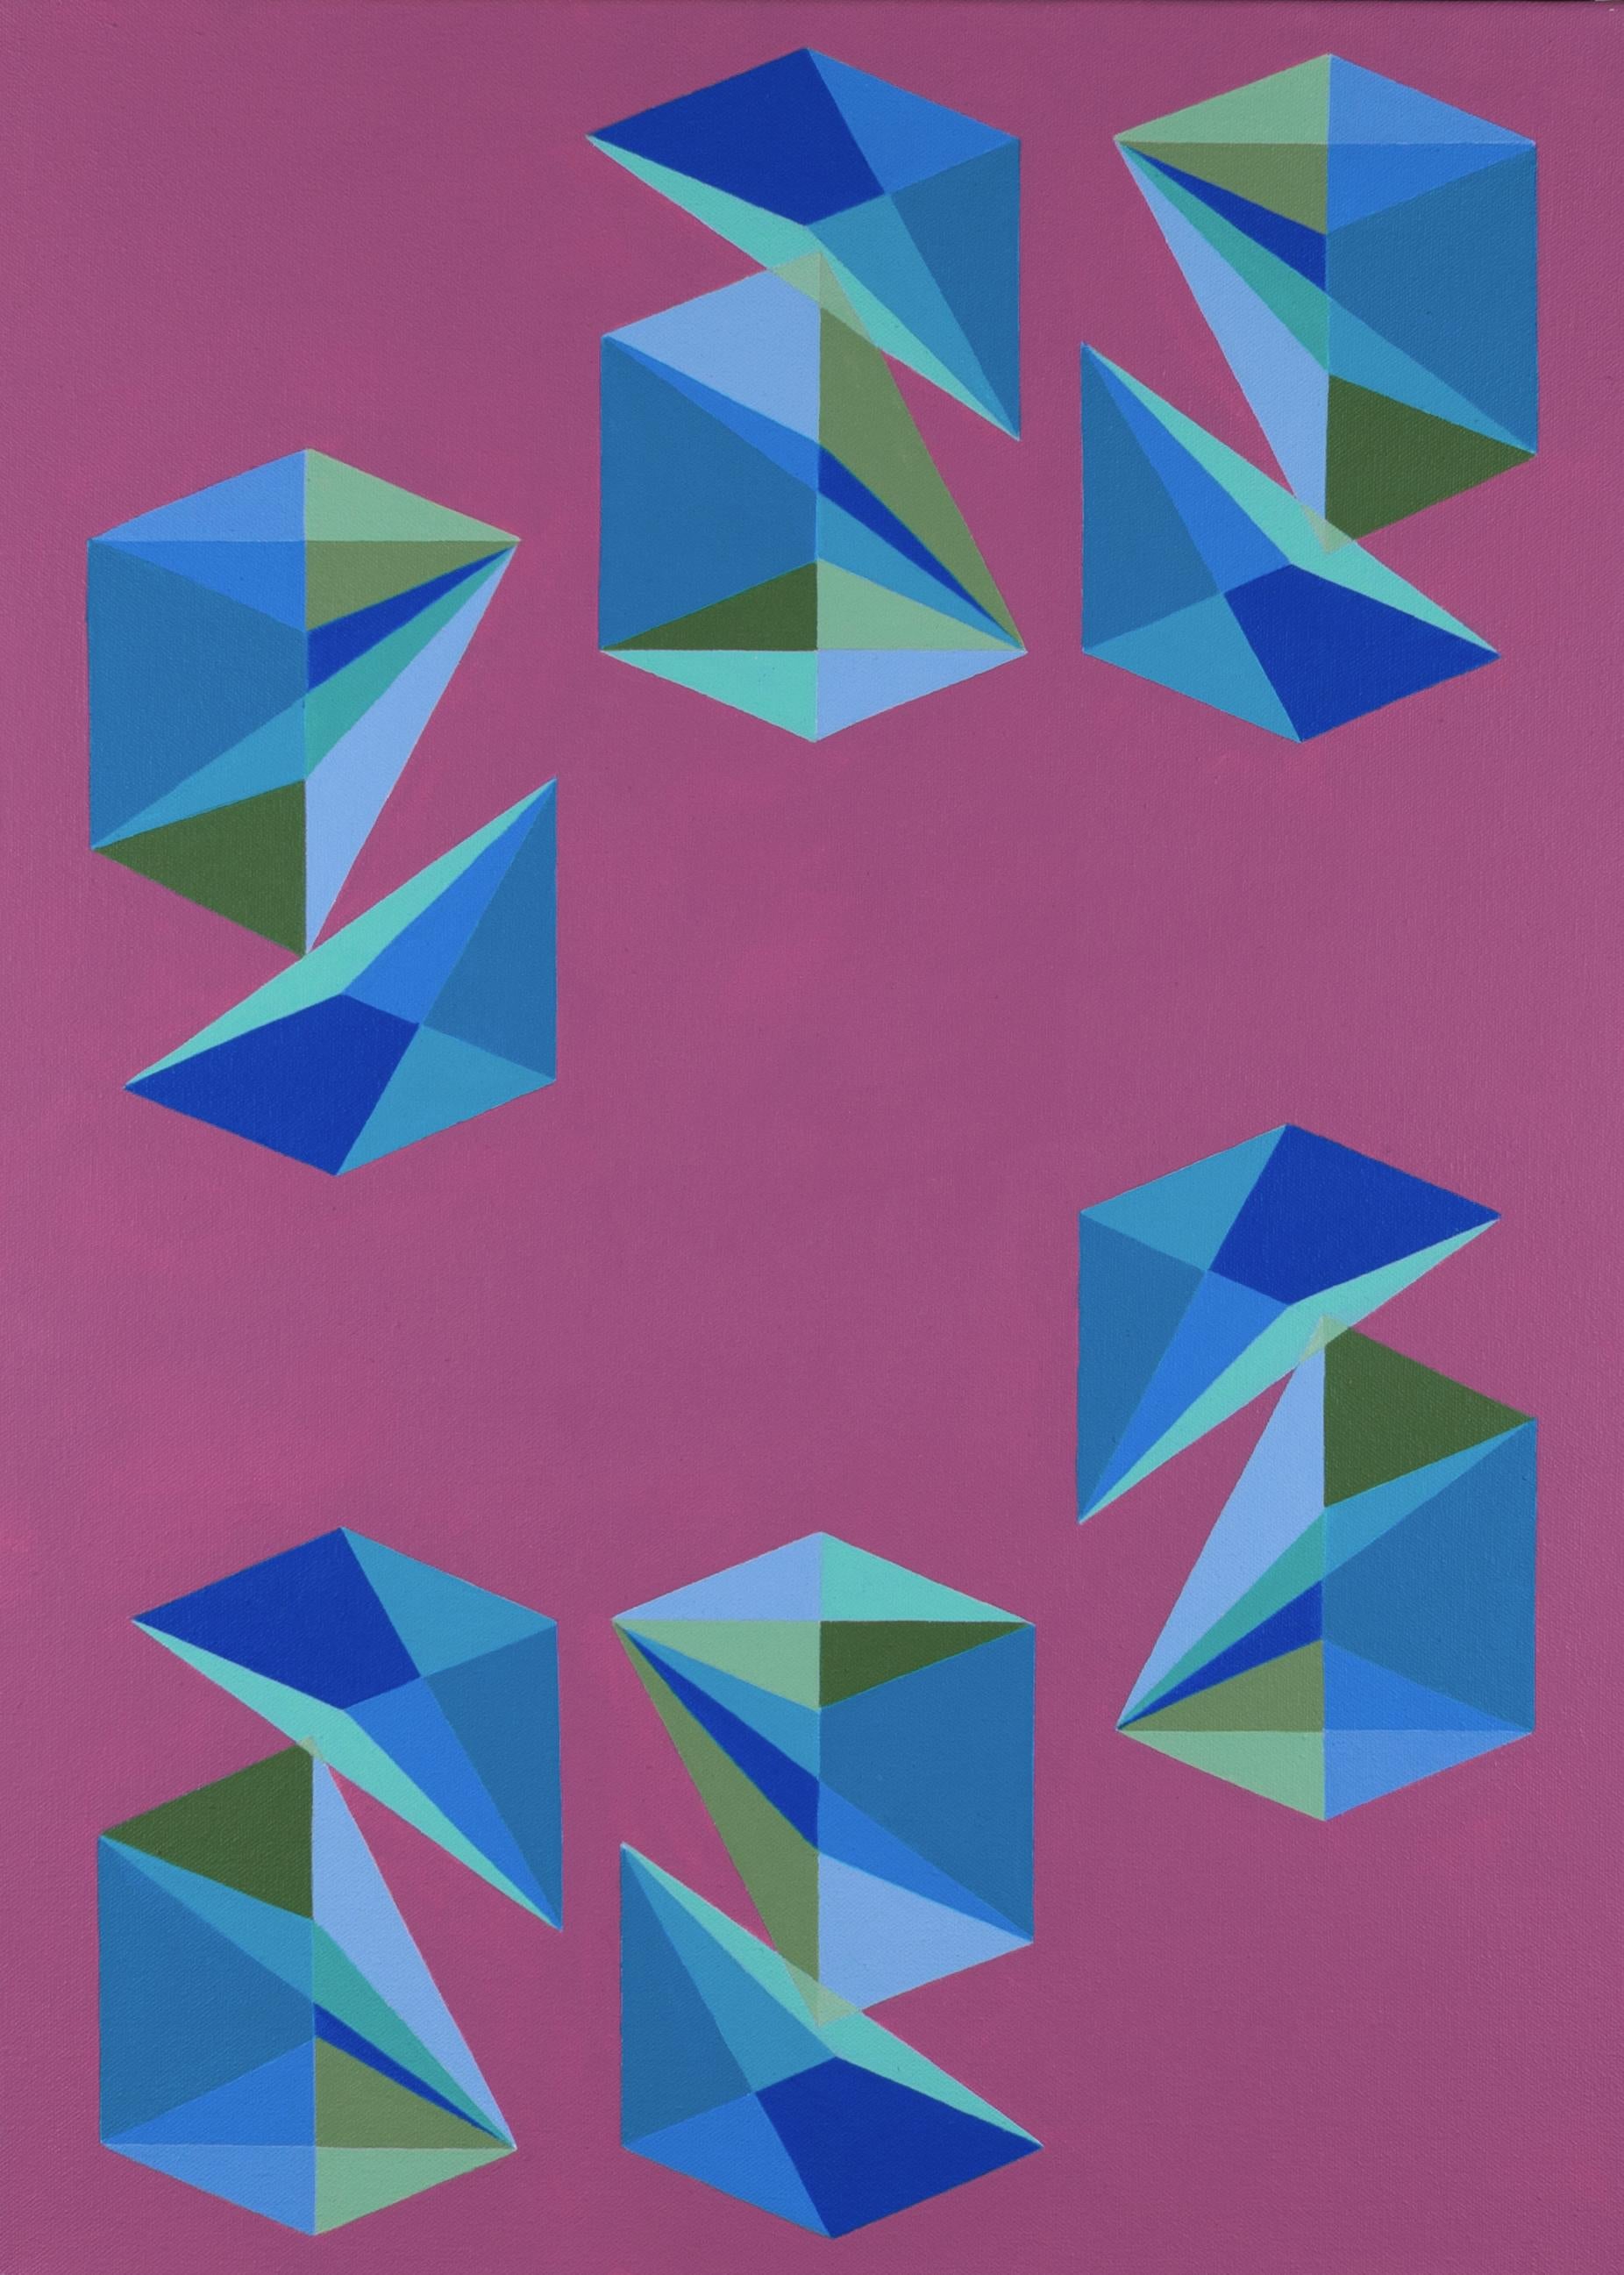 This geometric abstract acrylic on canvas painting is part of Weaver's 